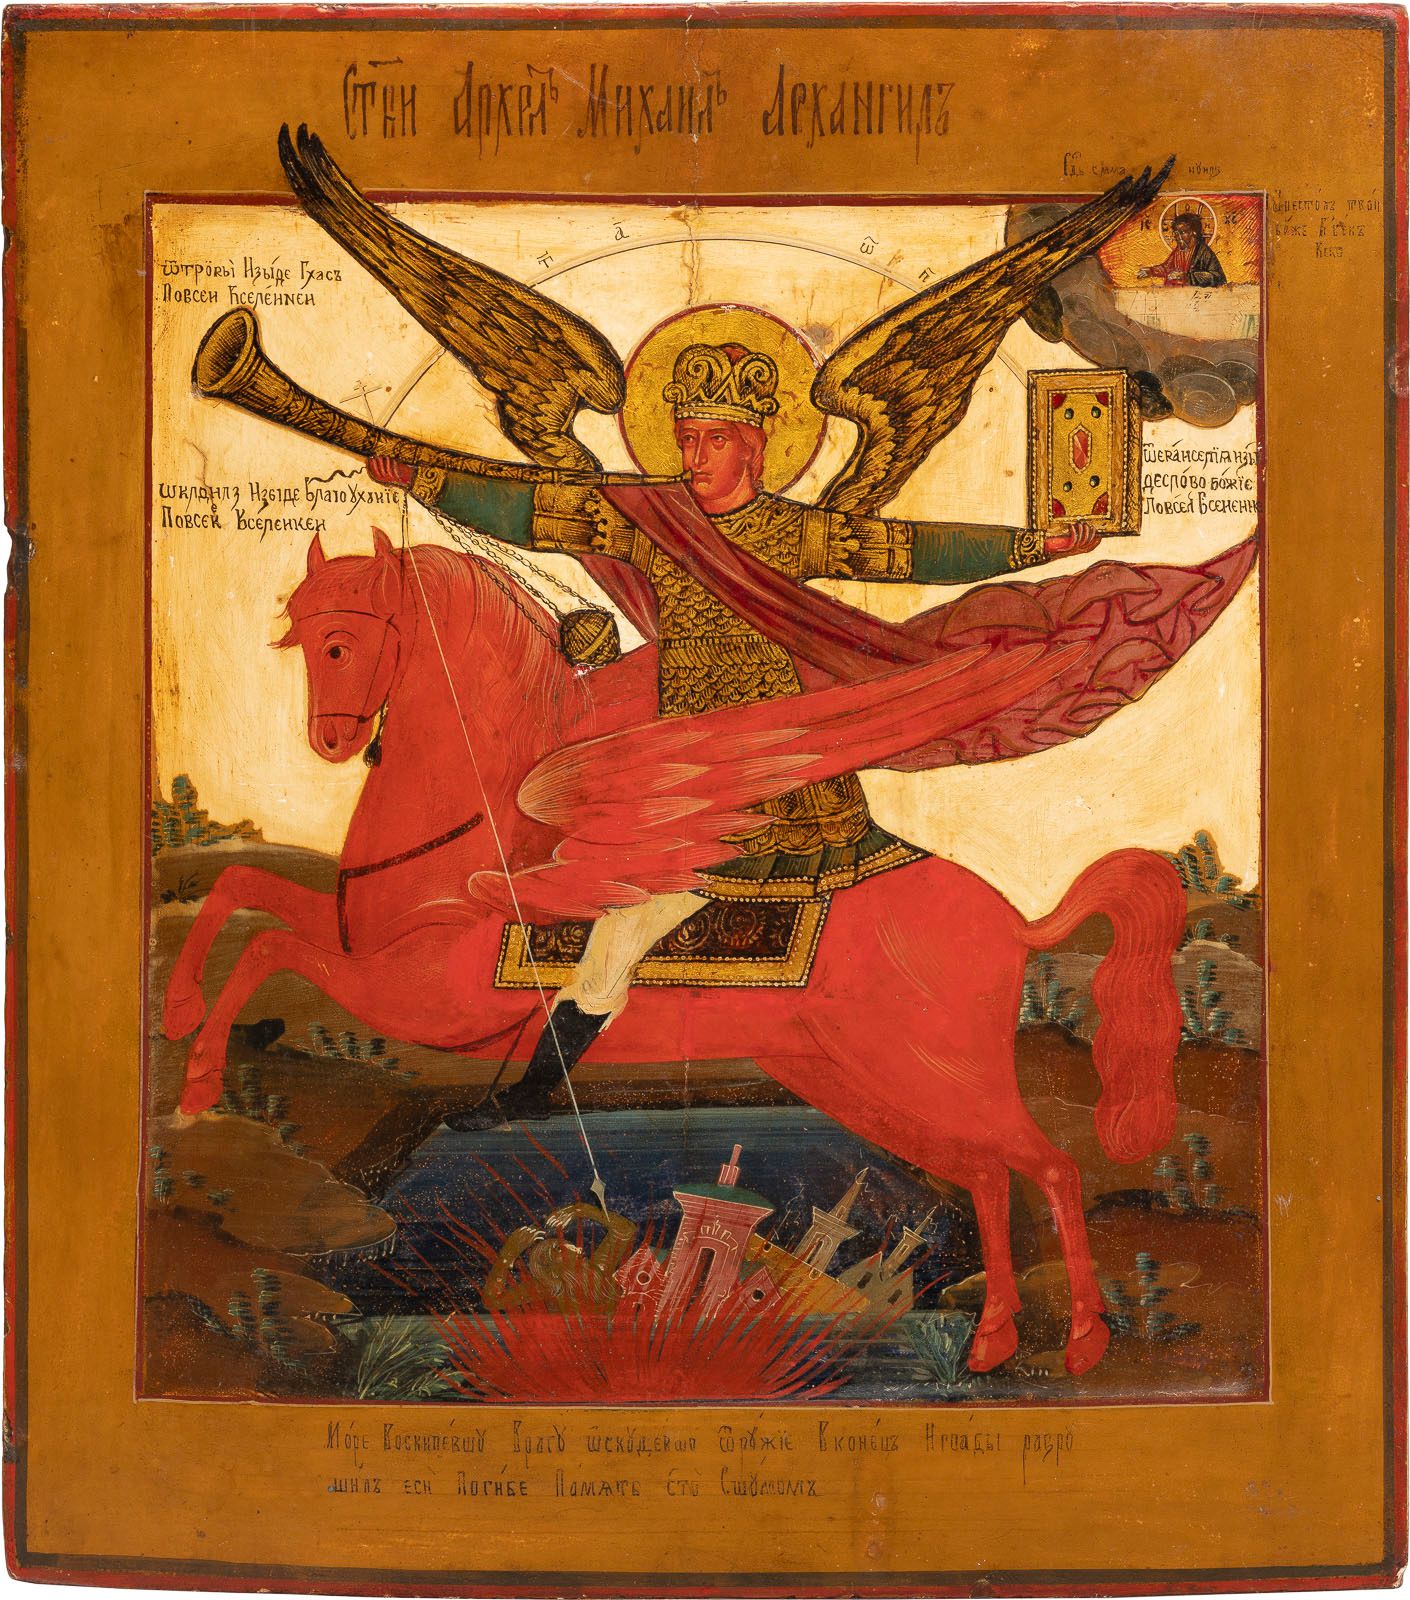 AN ICON SHOWING THE ARCHANGEL MICHAEL AS HORSEMAN OF THE AP ICONO CON EL ARCANGE&hellip;